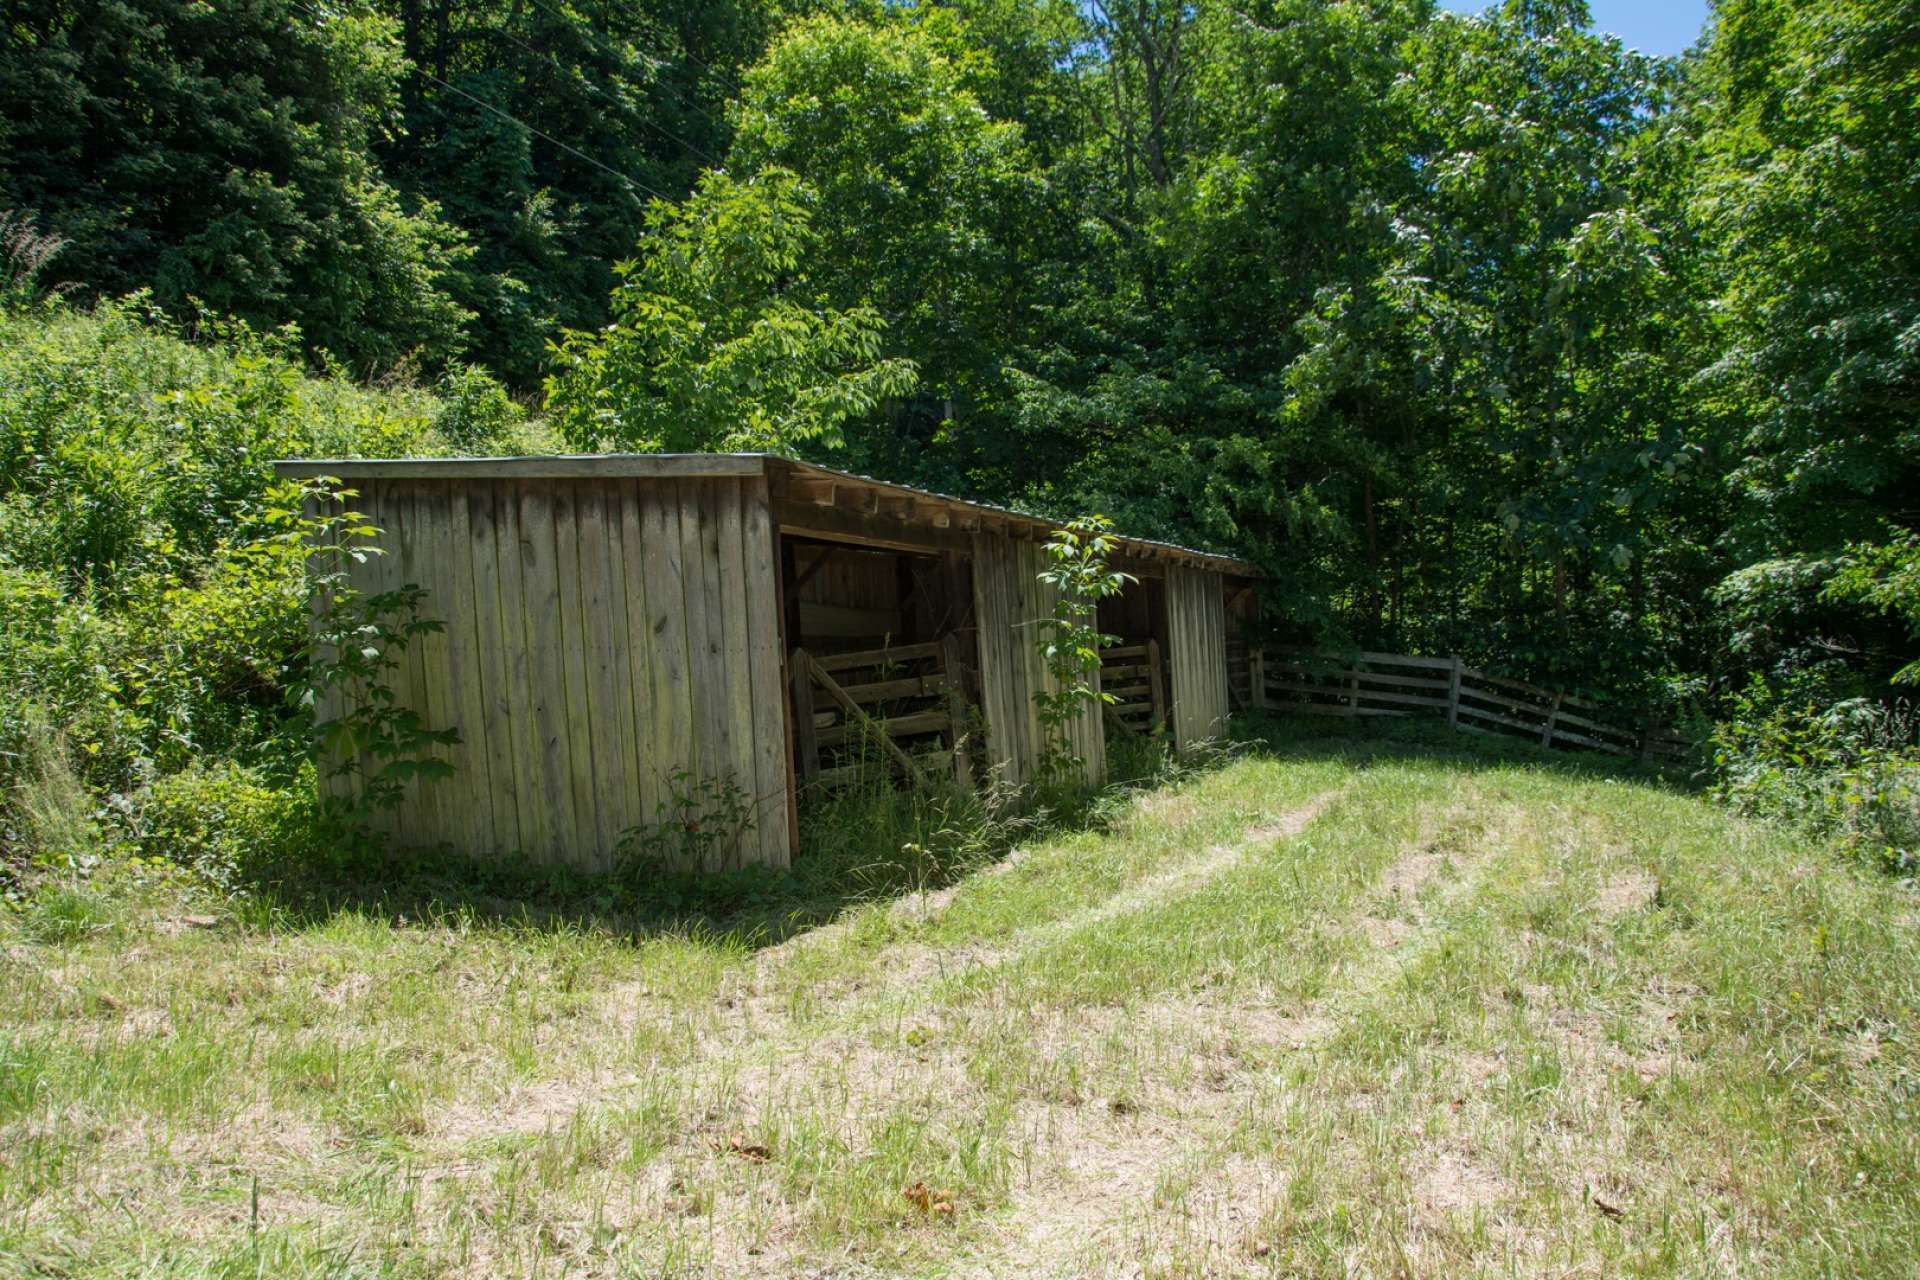 This outbuilding allows for storage of farm or lawn equipment.  Everything here provides for a mini-farm experience or those looking to escape to a country lifestyle.